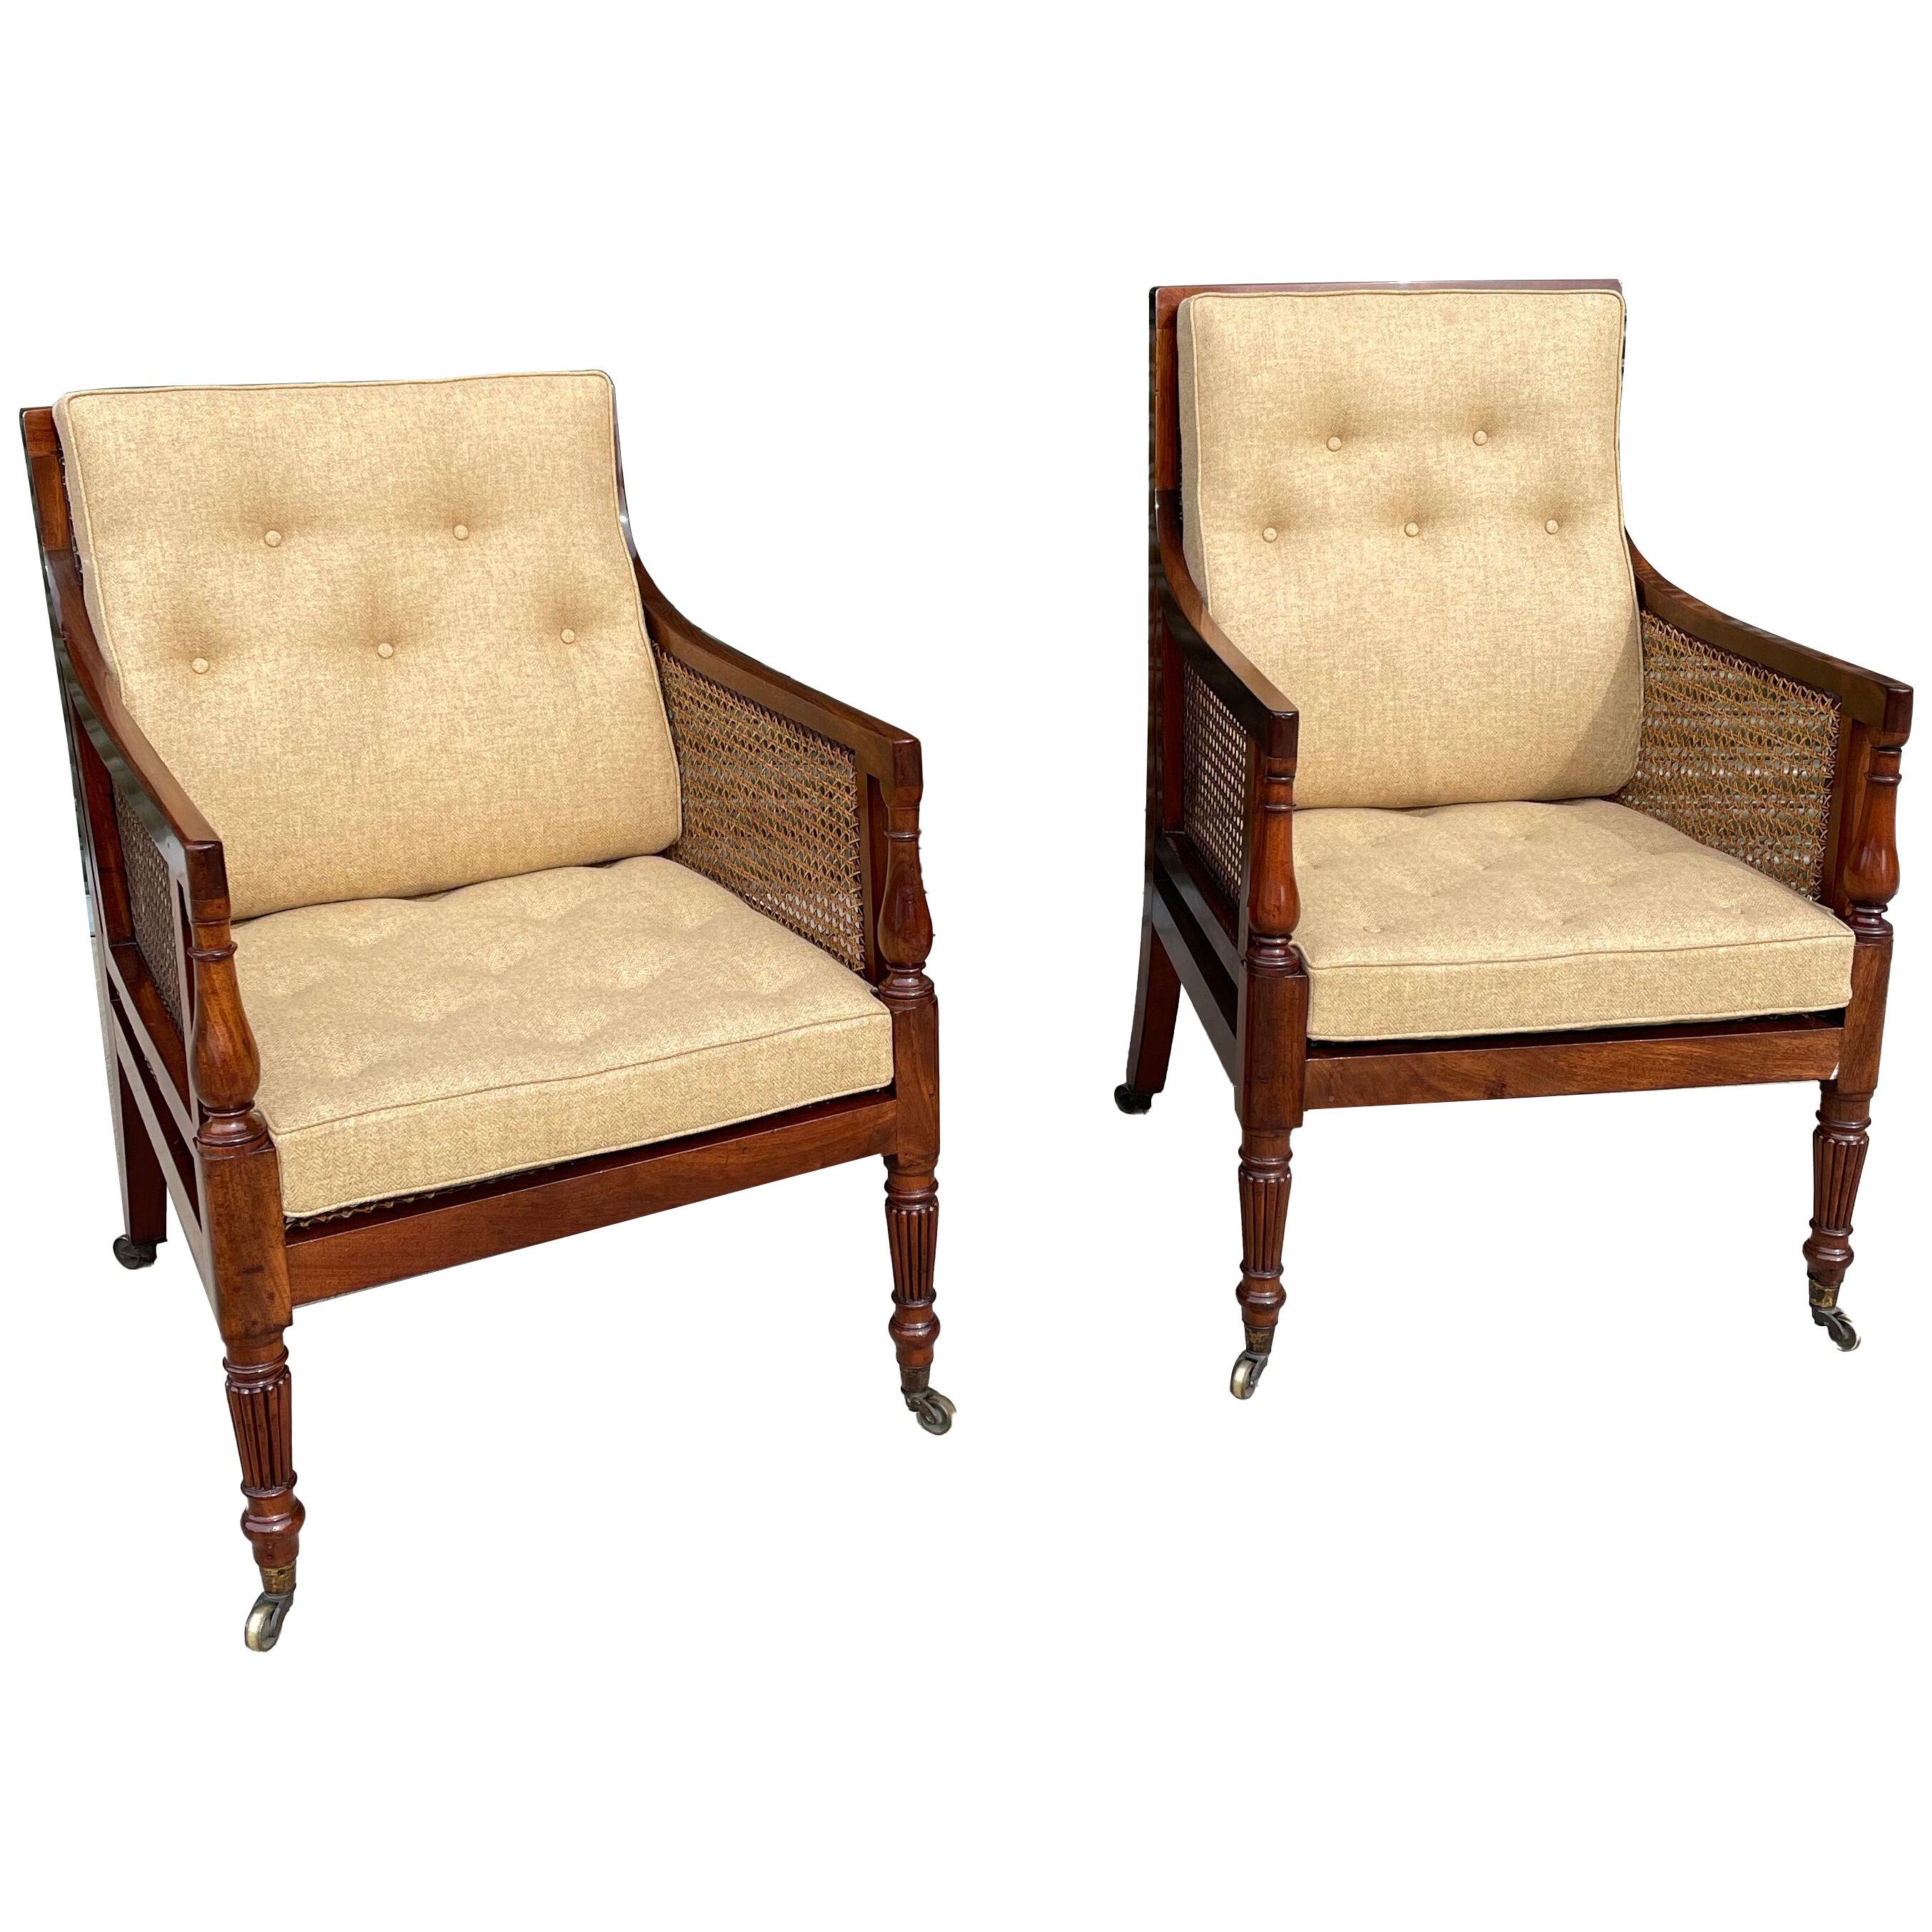 Pair of Regency period Lady and Gentleman Bergere chairs